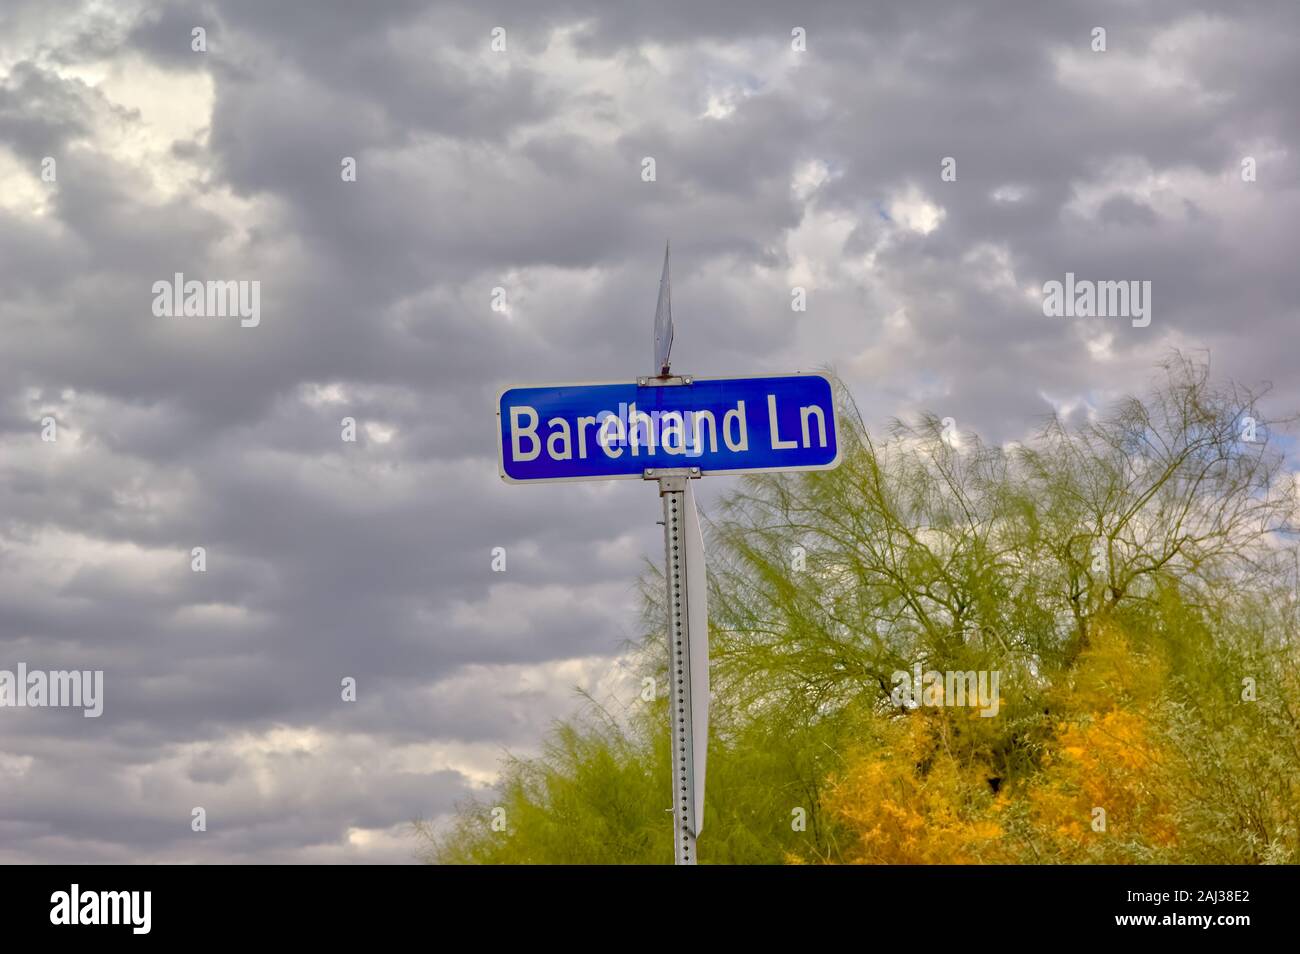 A cloudy day for a strangely named road in Arizona called Barehand Lane. Stock Photo